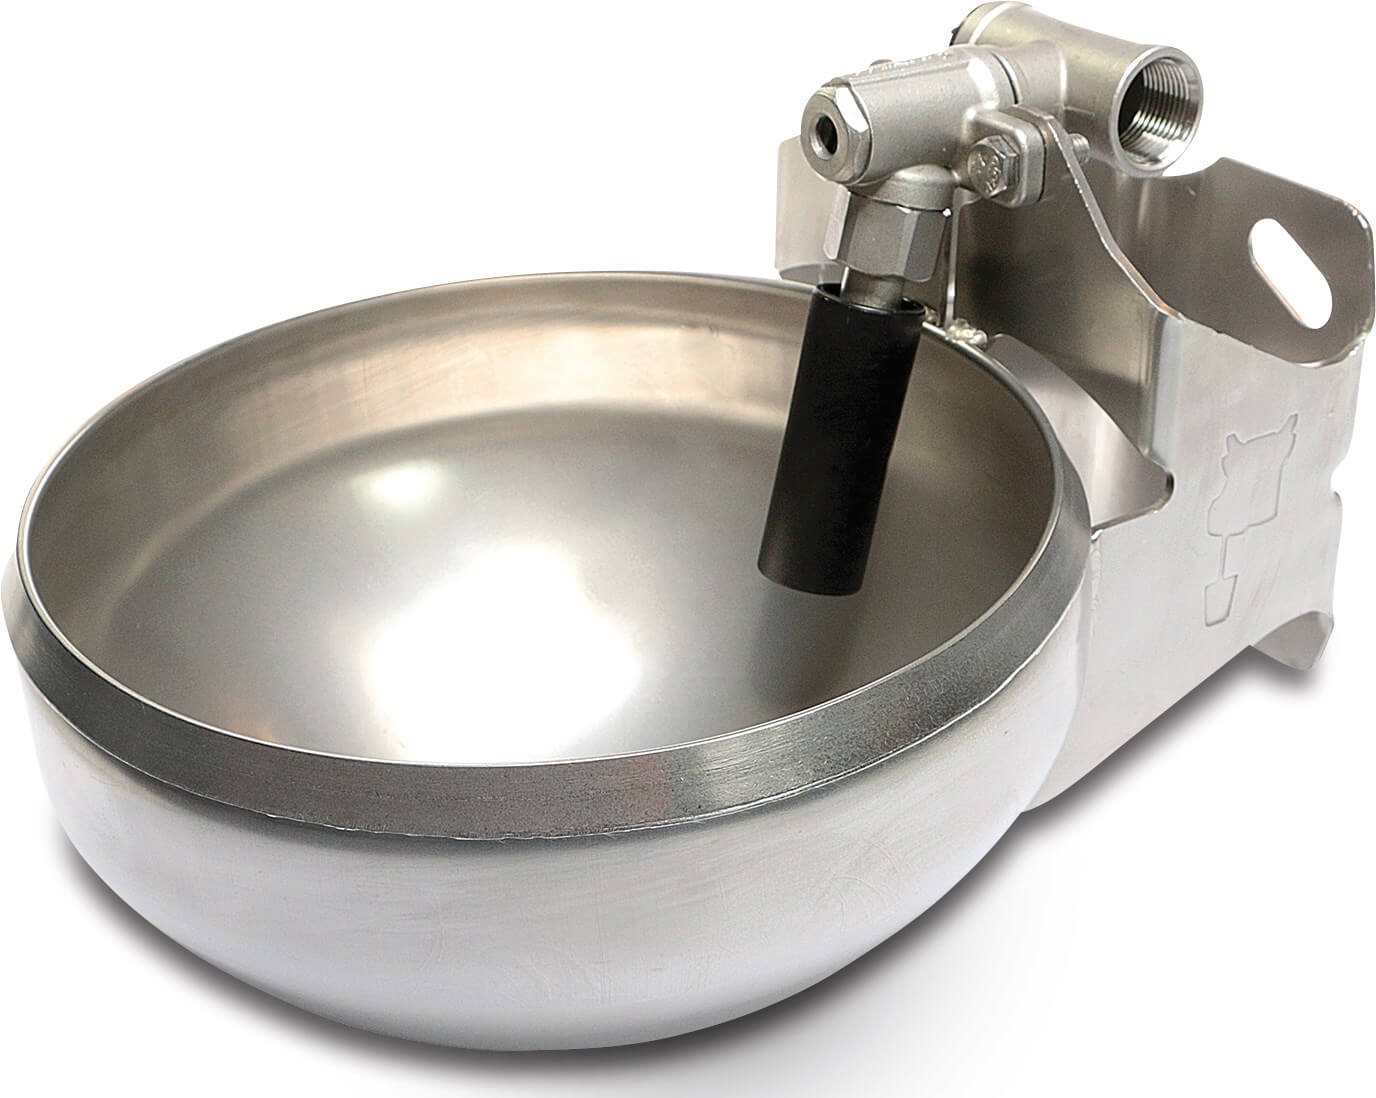 La Buvette Drinking bowl with tube stainless steel type F130 Inox